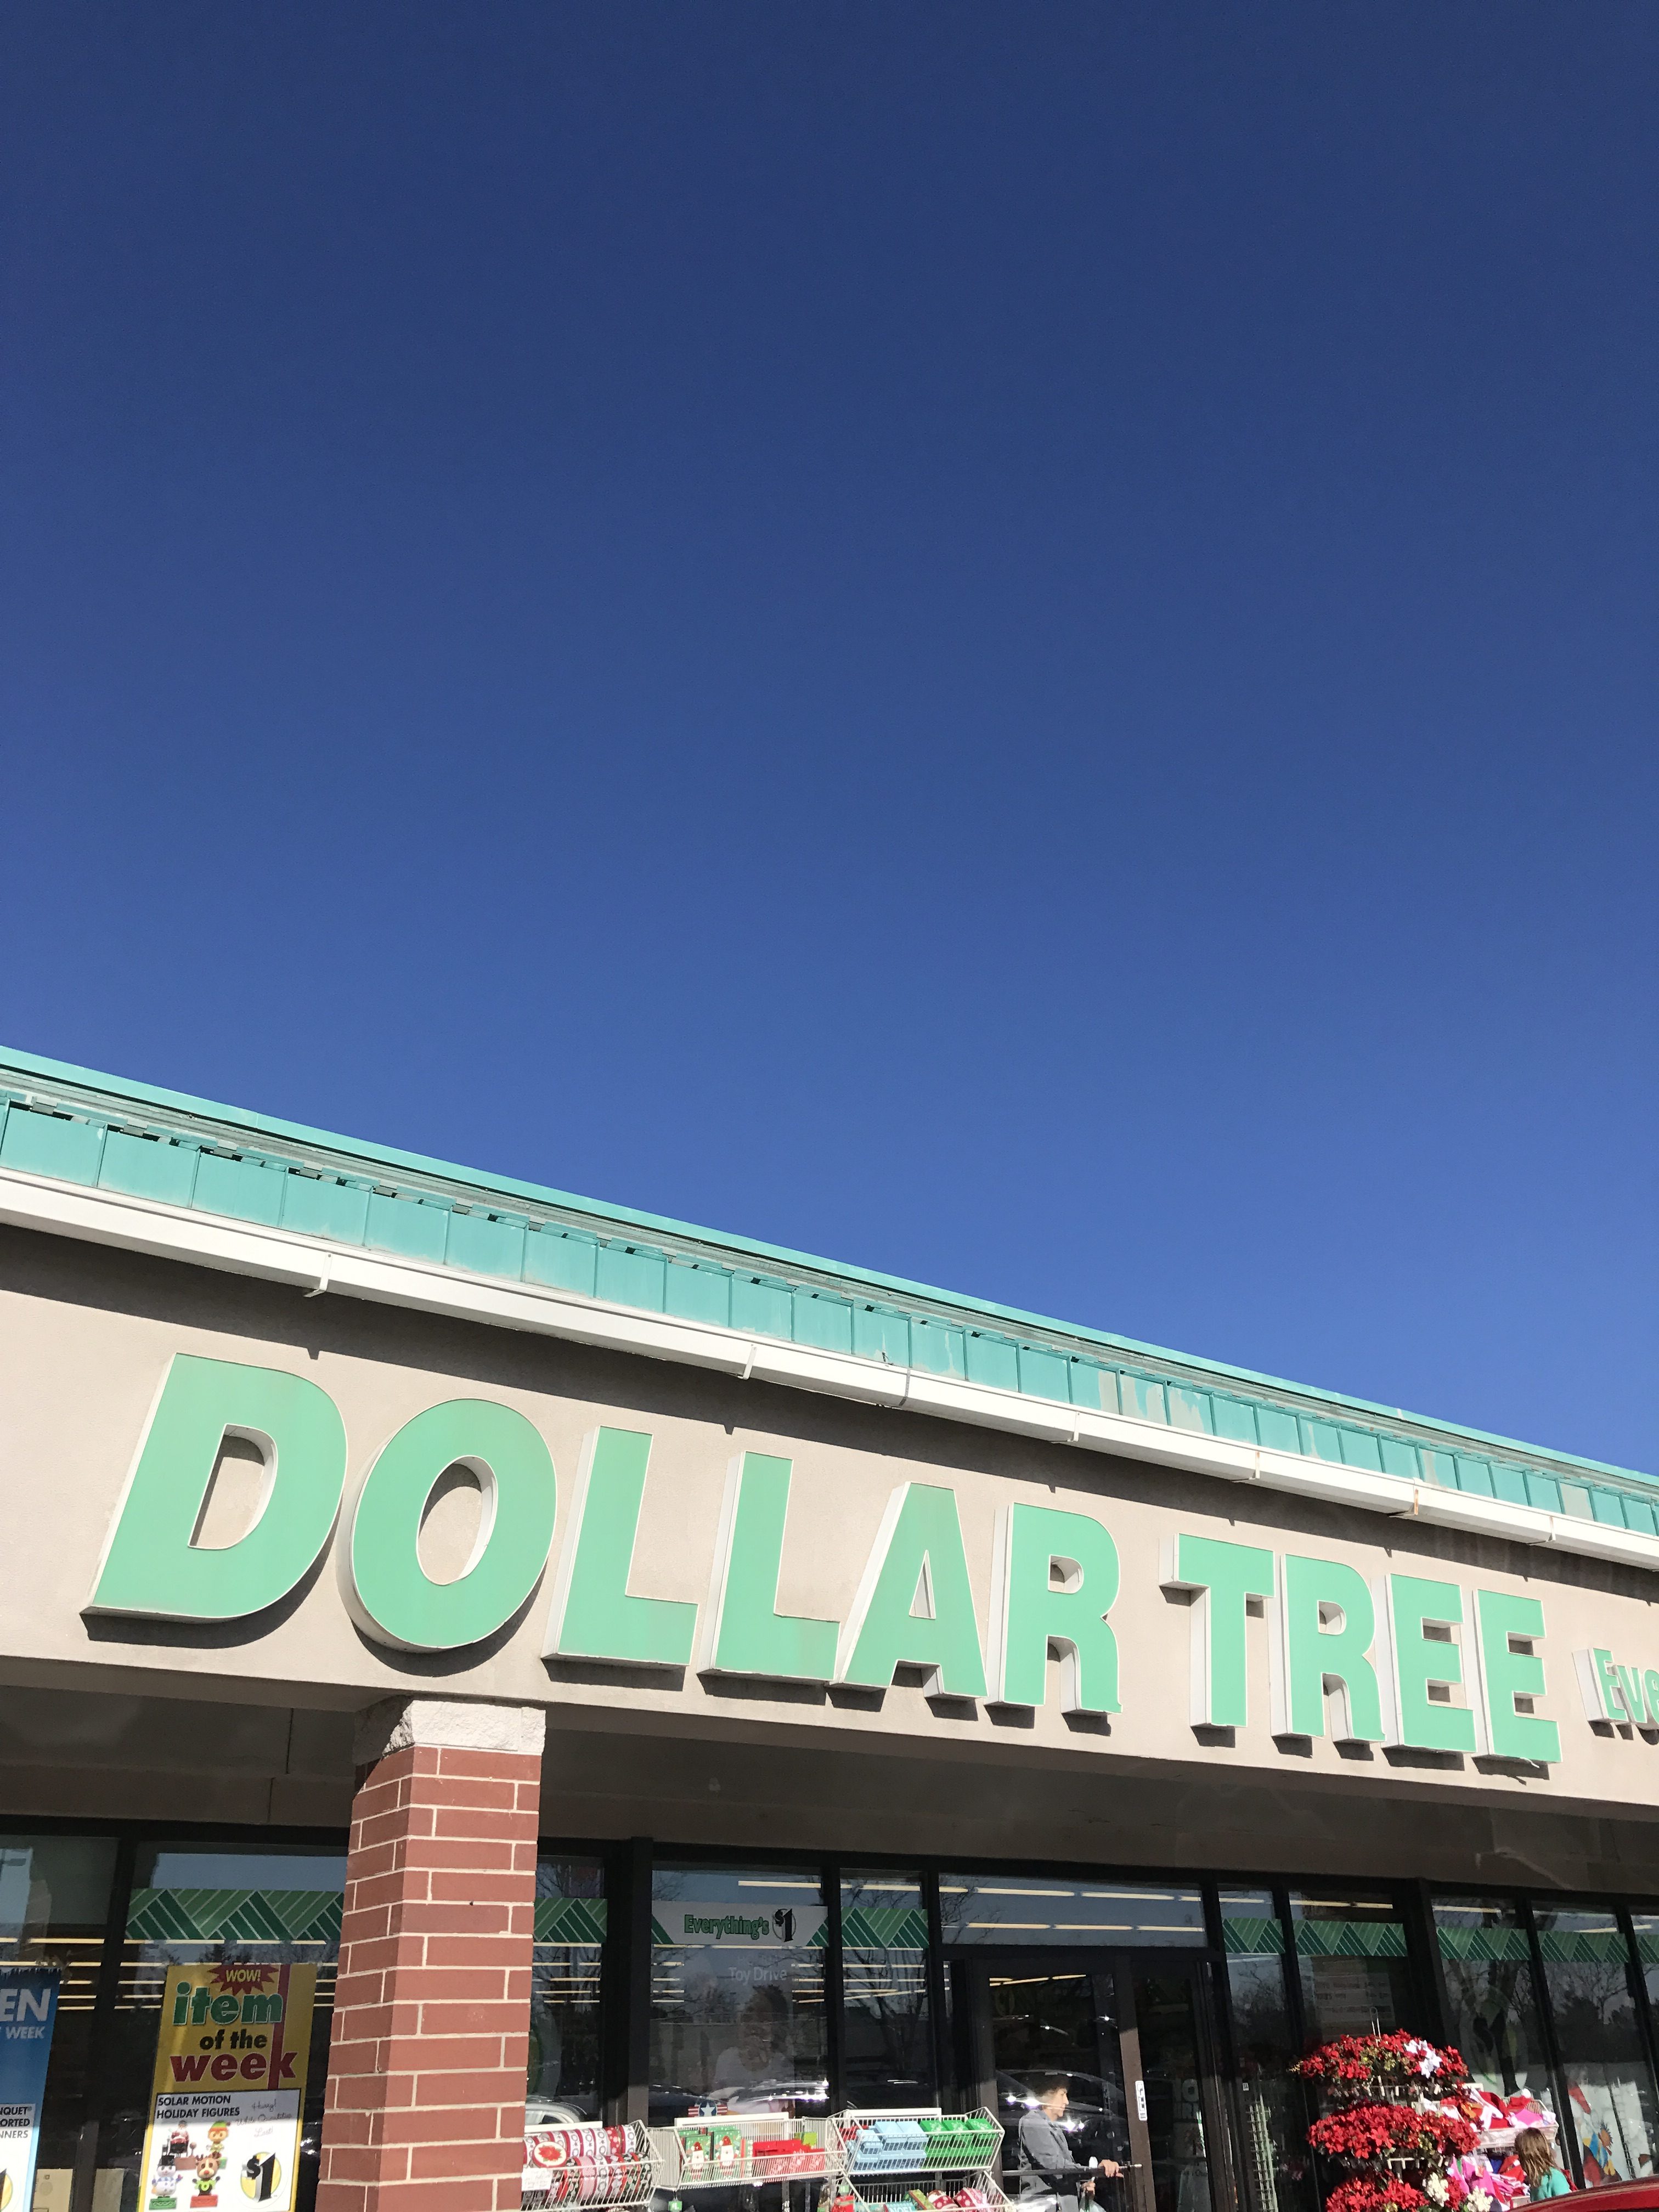 The Best Tips for Shopping at the Dollar Tree